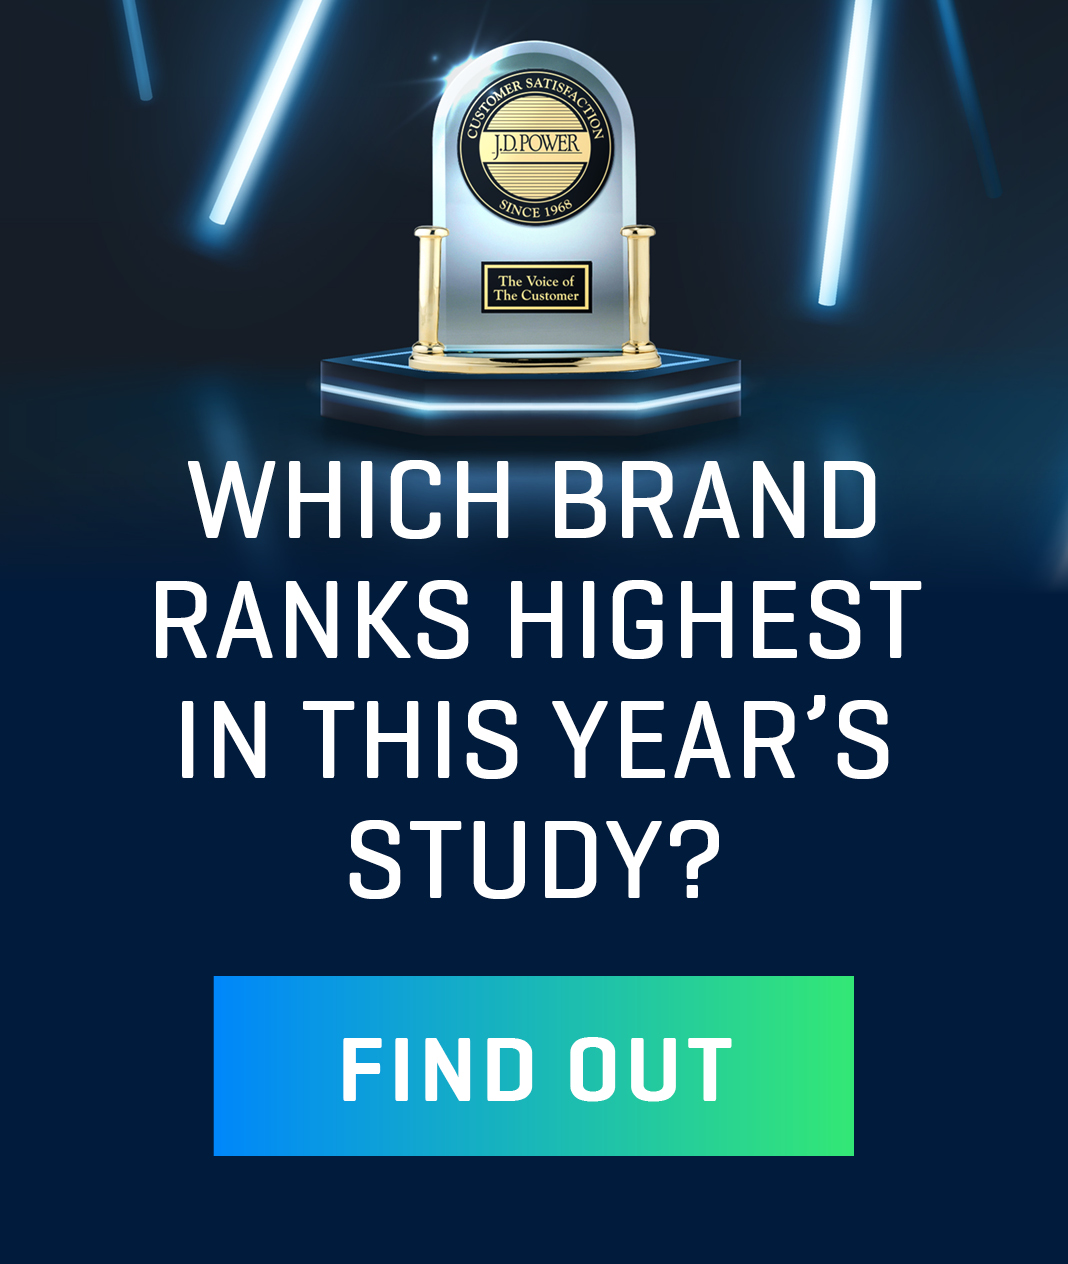 Which brand ranks highest in this year's study?